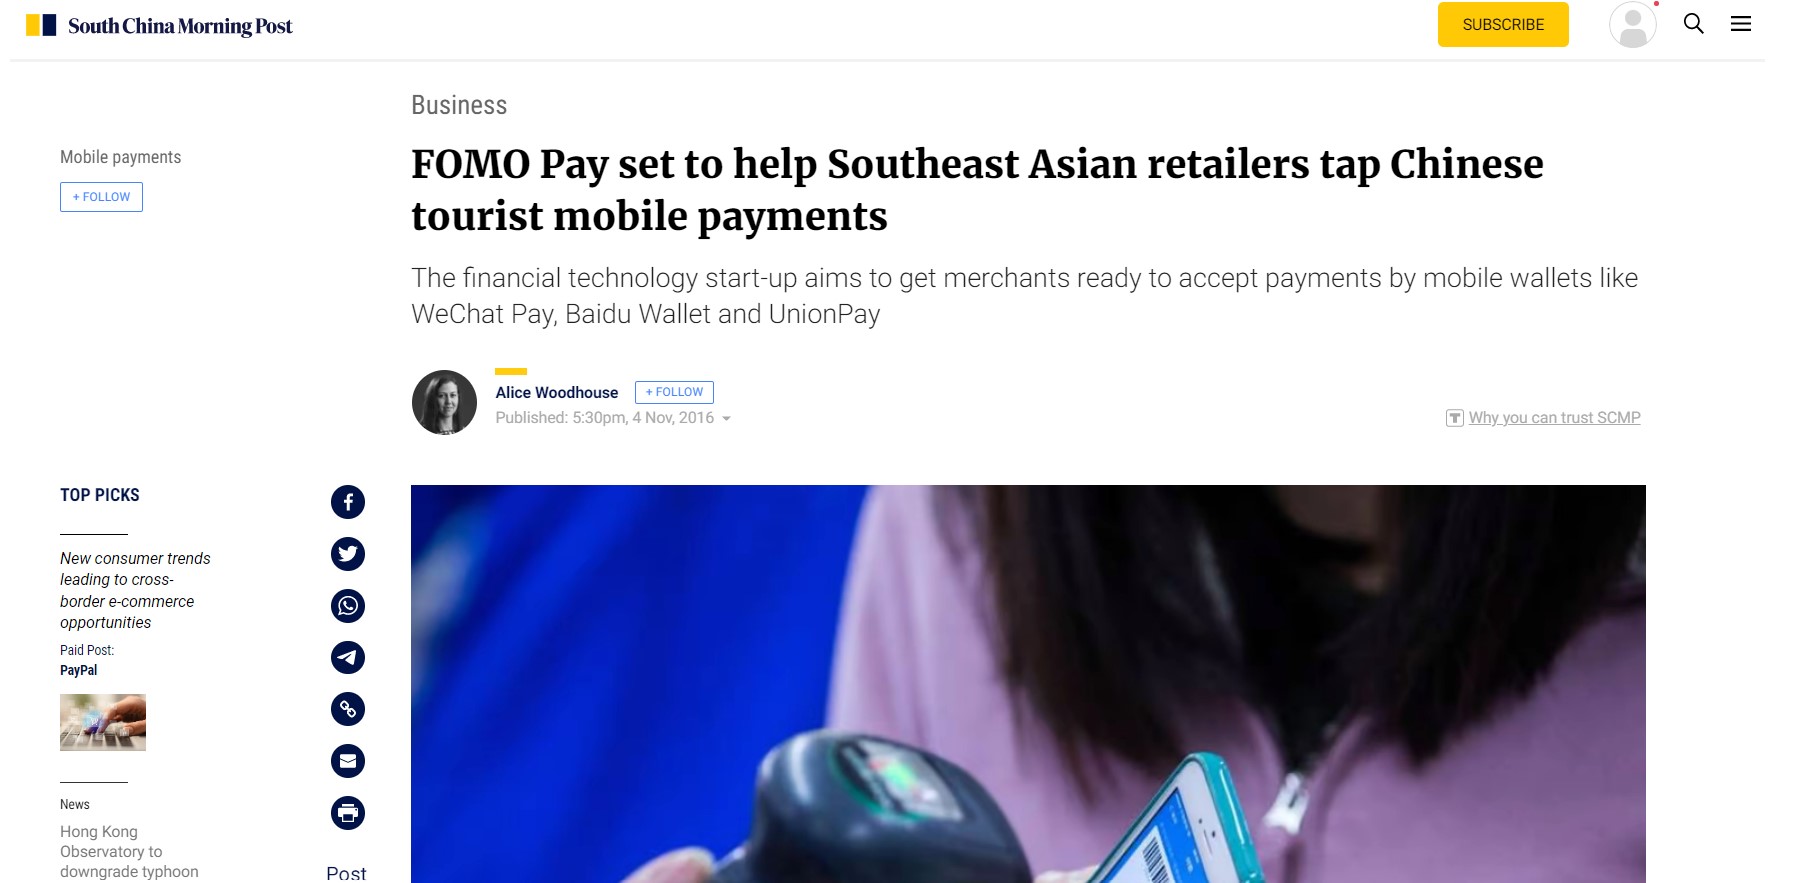 South China Morning Post: FOMO Pay set to help Southeast Asian retailers tap Chinese tourist mobile payments